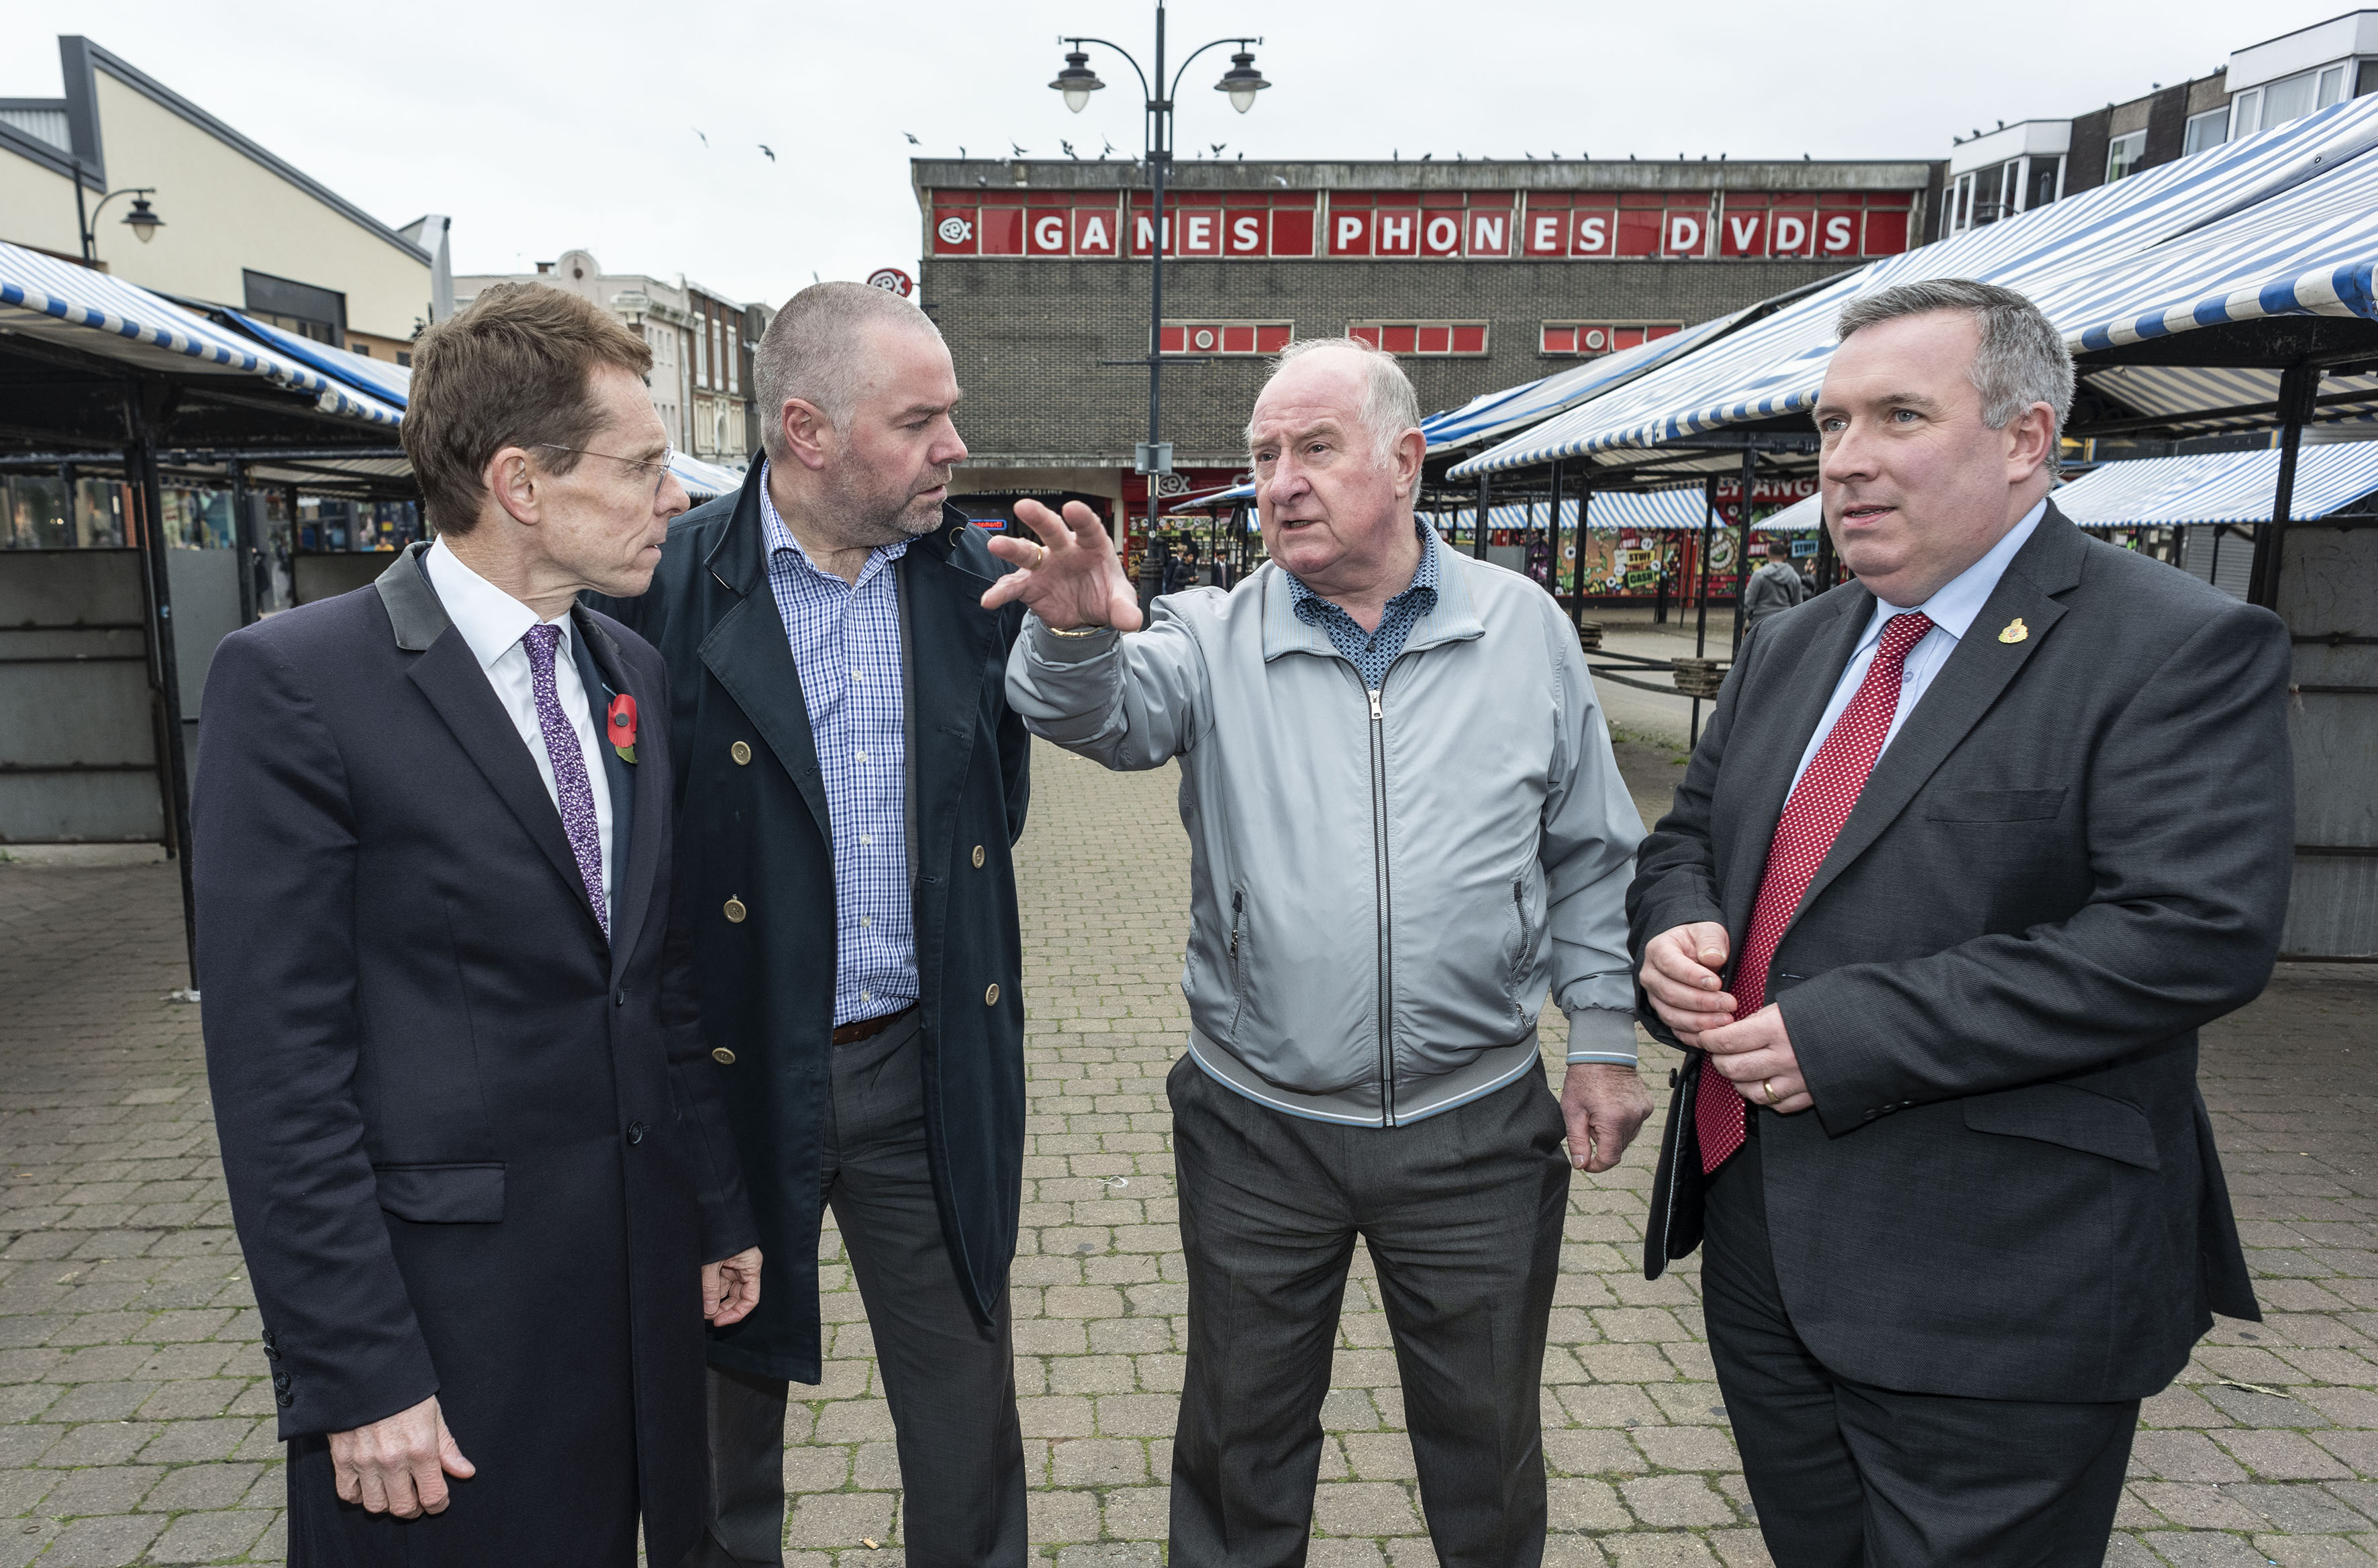 L-R Mayor of the West Midlands Andy Street with Simon Tranter, head of regeneration and development at Walsall Council, Cllr Mike Bird, leader of Walsall Council and Cllr Adrian Andrew, deputy leader, at the recent launch of a regional project to help transform and revitalise town centres